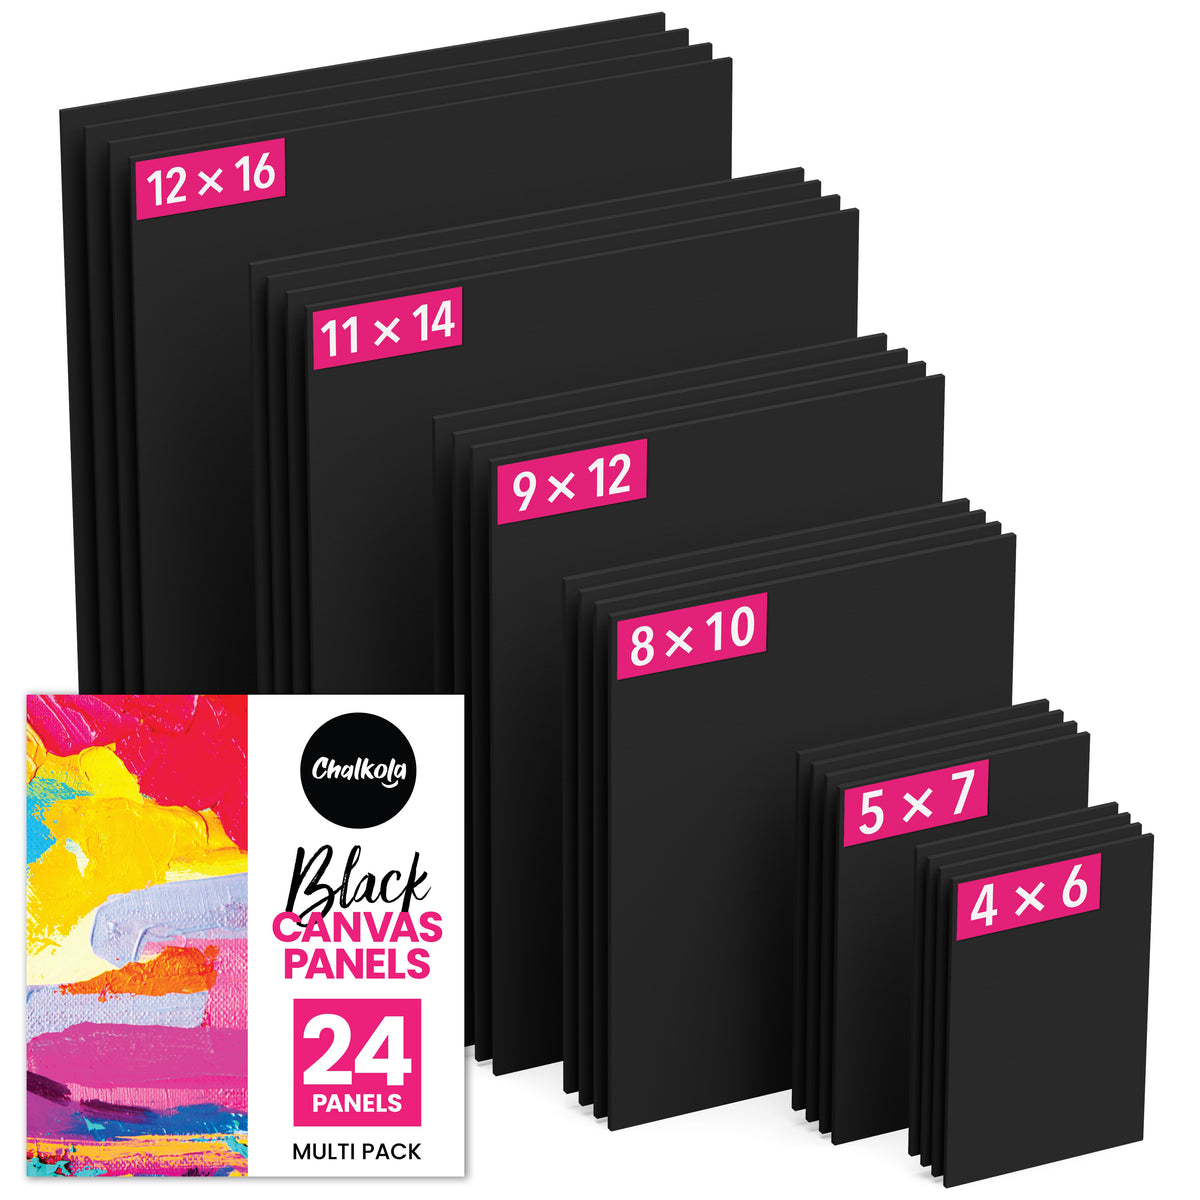 Painting Canvas Panels | 4x6, 5x7, 8x10, 9x12, 11x14, 12x16 inch (4 Each, 24 Pack)